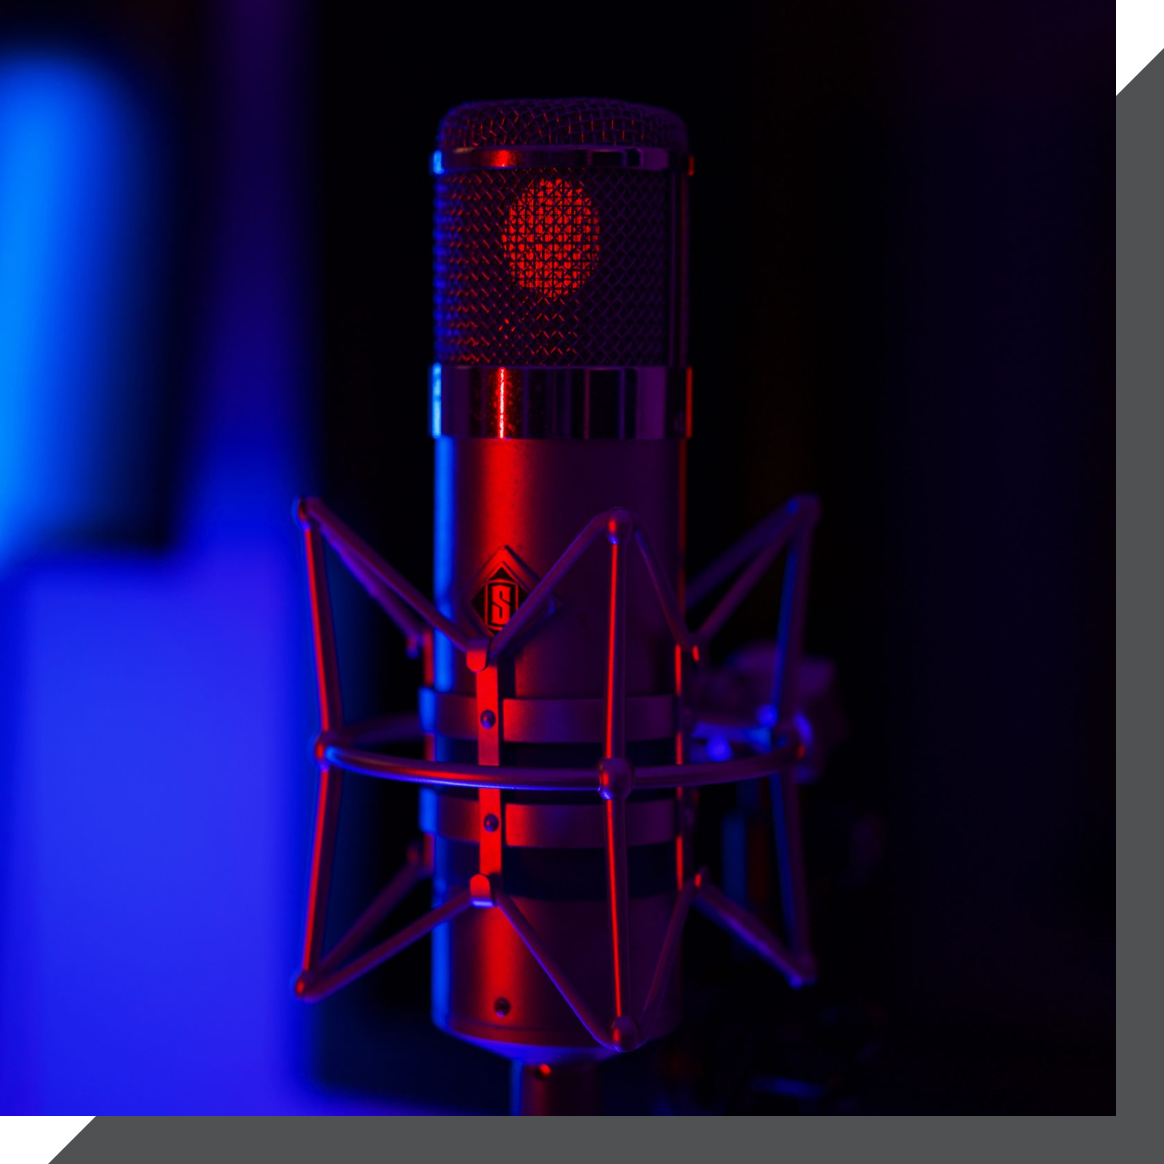 A close-up shot of a studio microphone illuminated by red and blue lights in a recording studio in London. The microphone is mounted on a shock mount, and the background is out of focus with a mix of blue and purple hues.